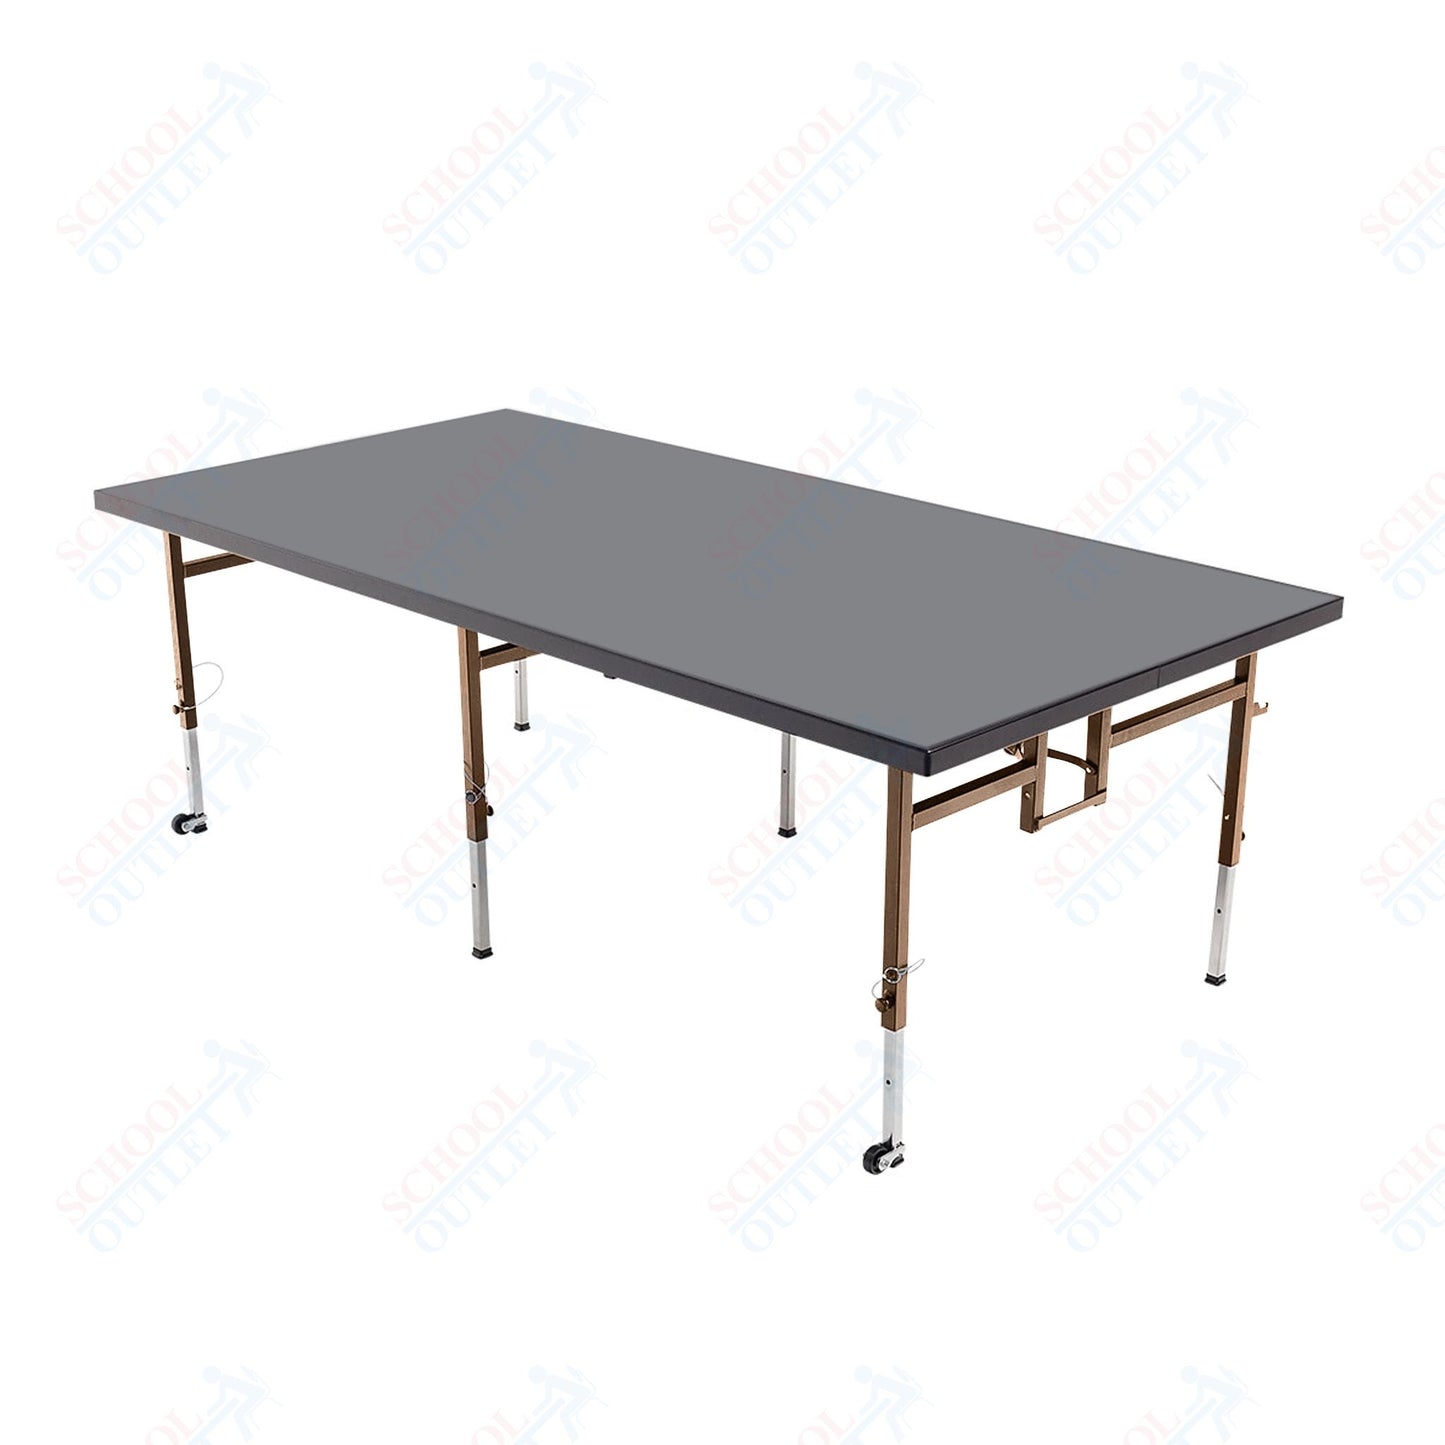 AmTab Adjustable Height Stage - Polypropylene Top - 36"W x 48"L x Adjustable 24" to 32"H  (AmTab AMT-STA3424P)